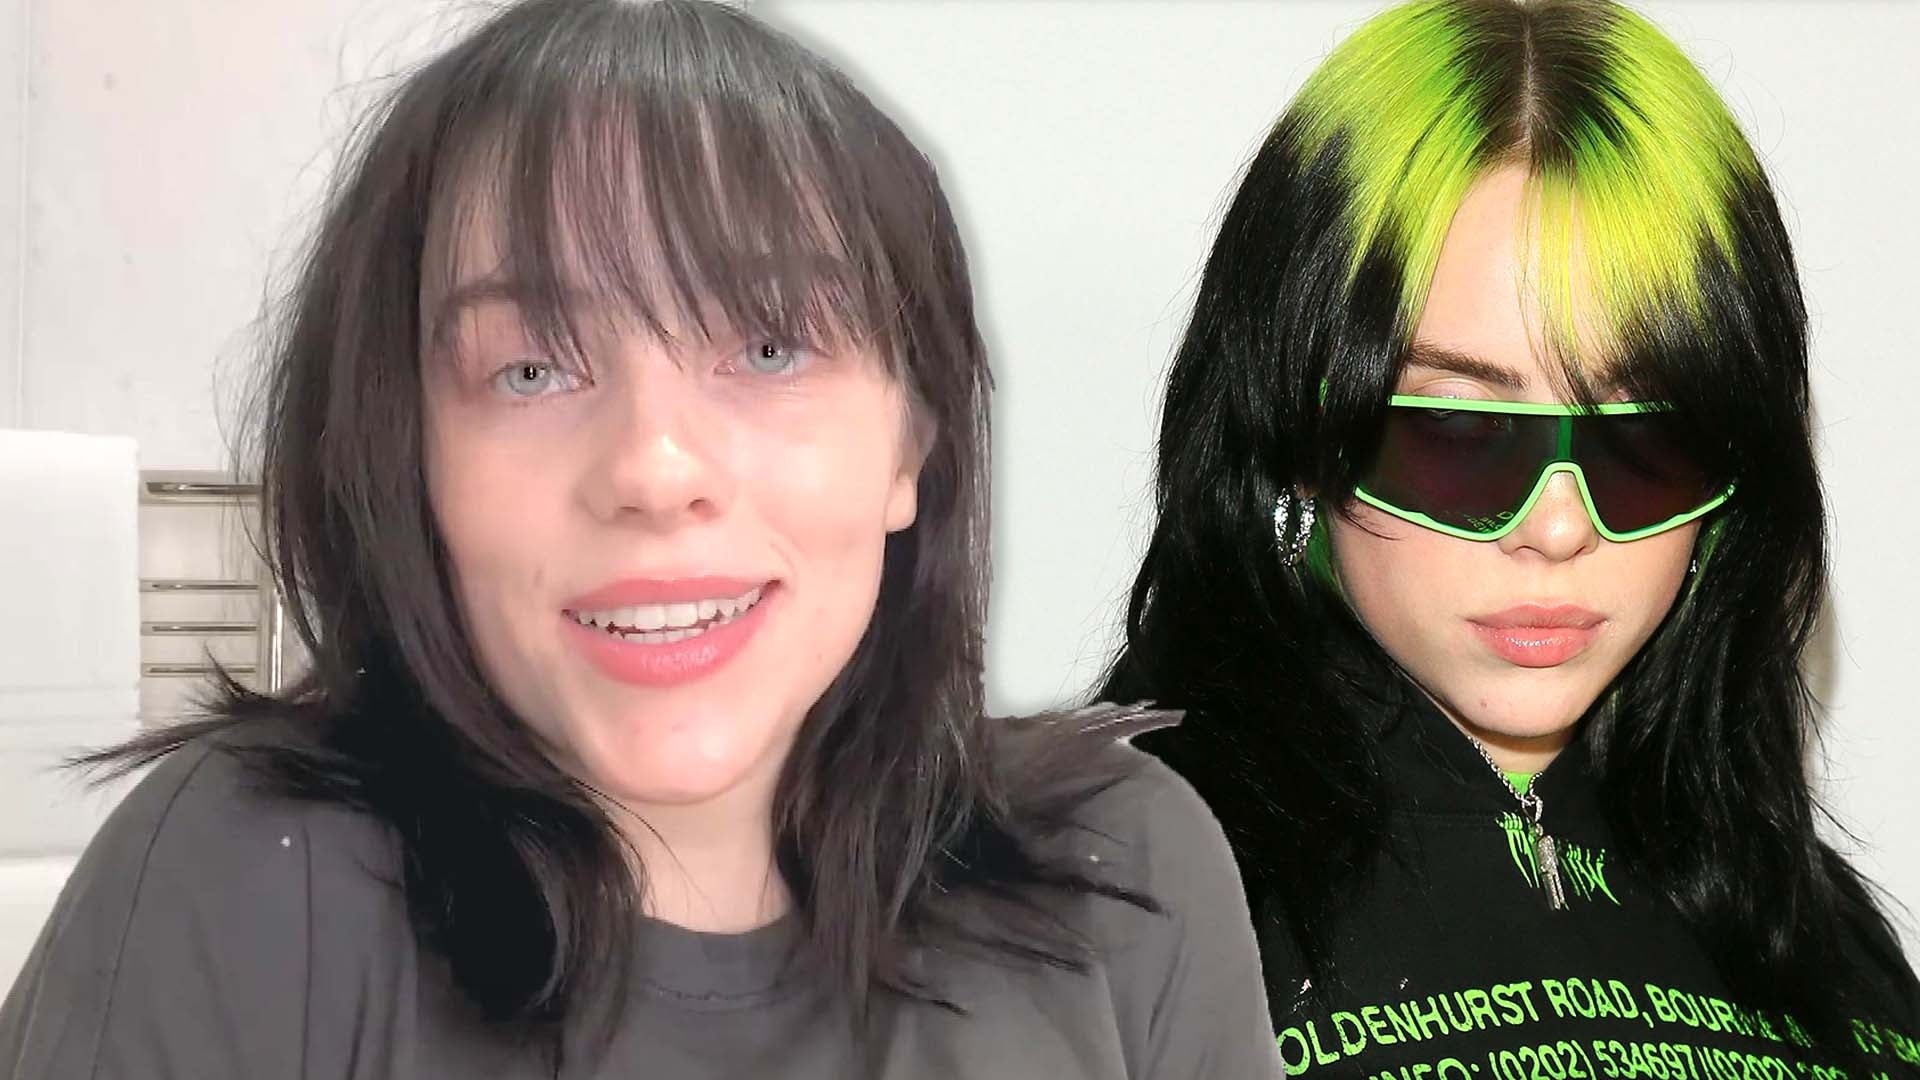 Billie Eilish Reveals Why She Stopped Dying Her Hair Wacky Colors 